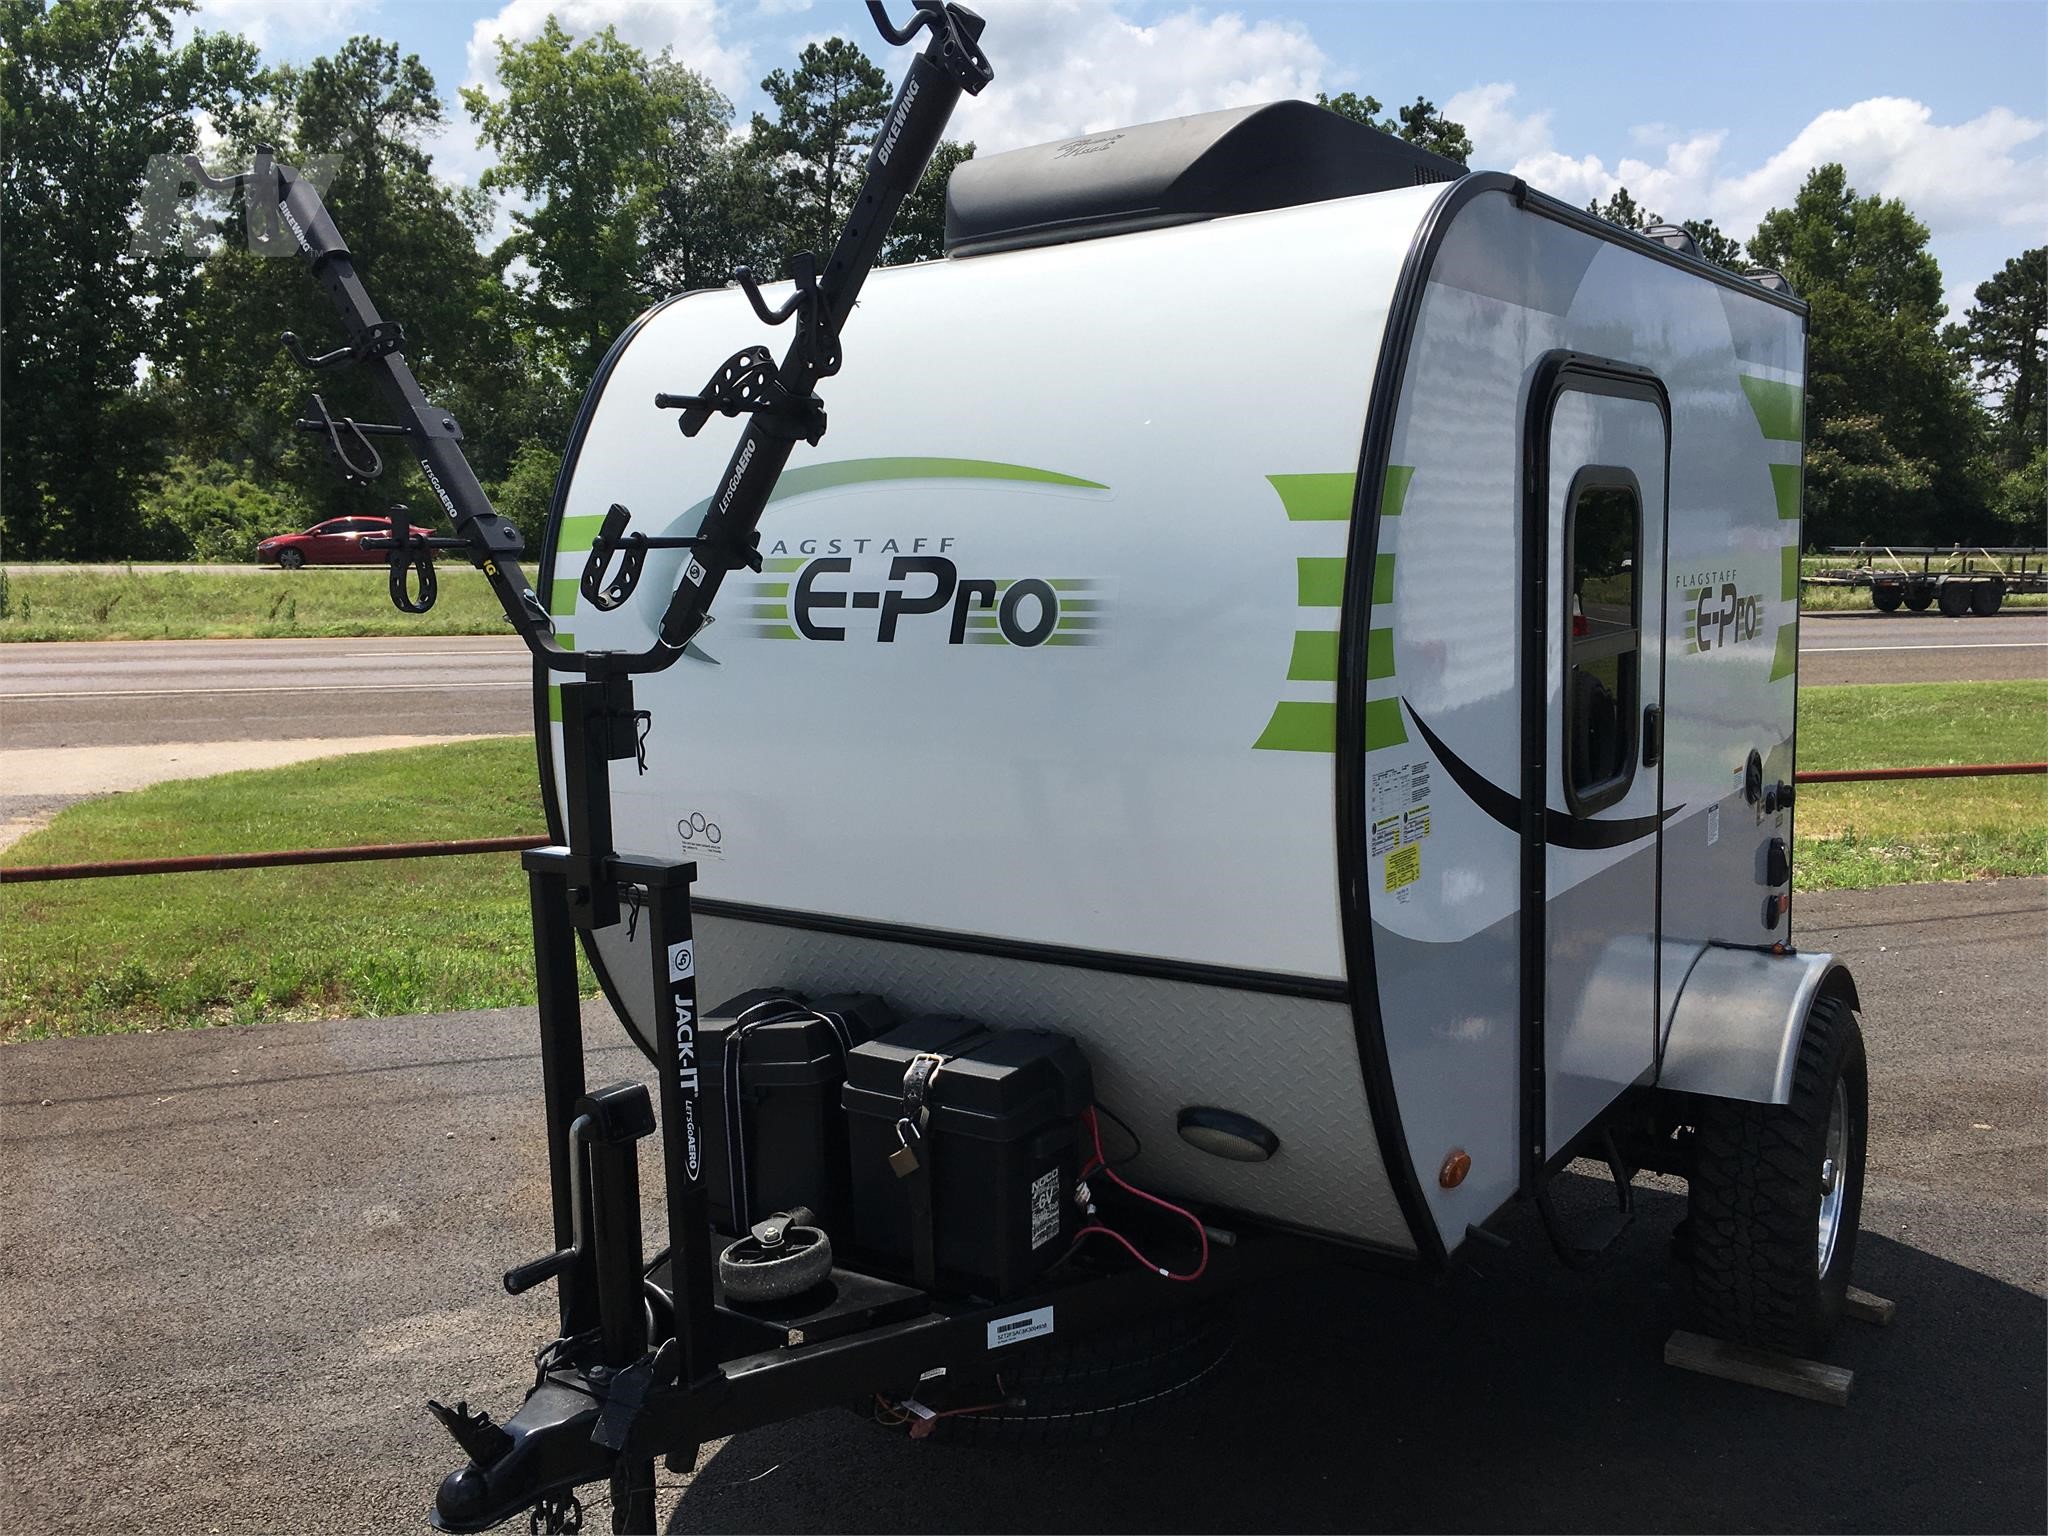 2019 FOREST RIVER FLAGSTAFF E-PRO 12RK For Sale in Nacogdoches, Texas | RVUniverse.com 2019 Forest River Flagstaff E Pro 12rk